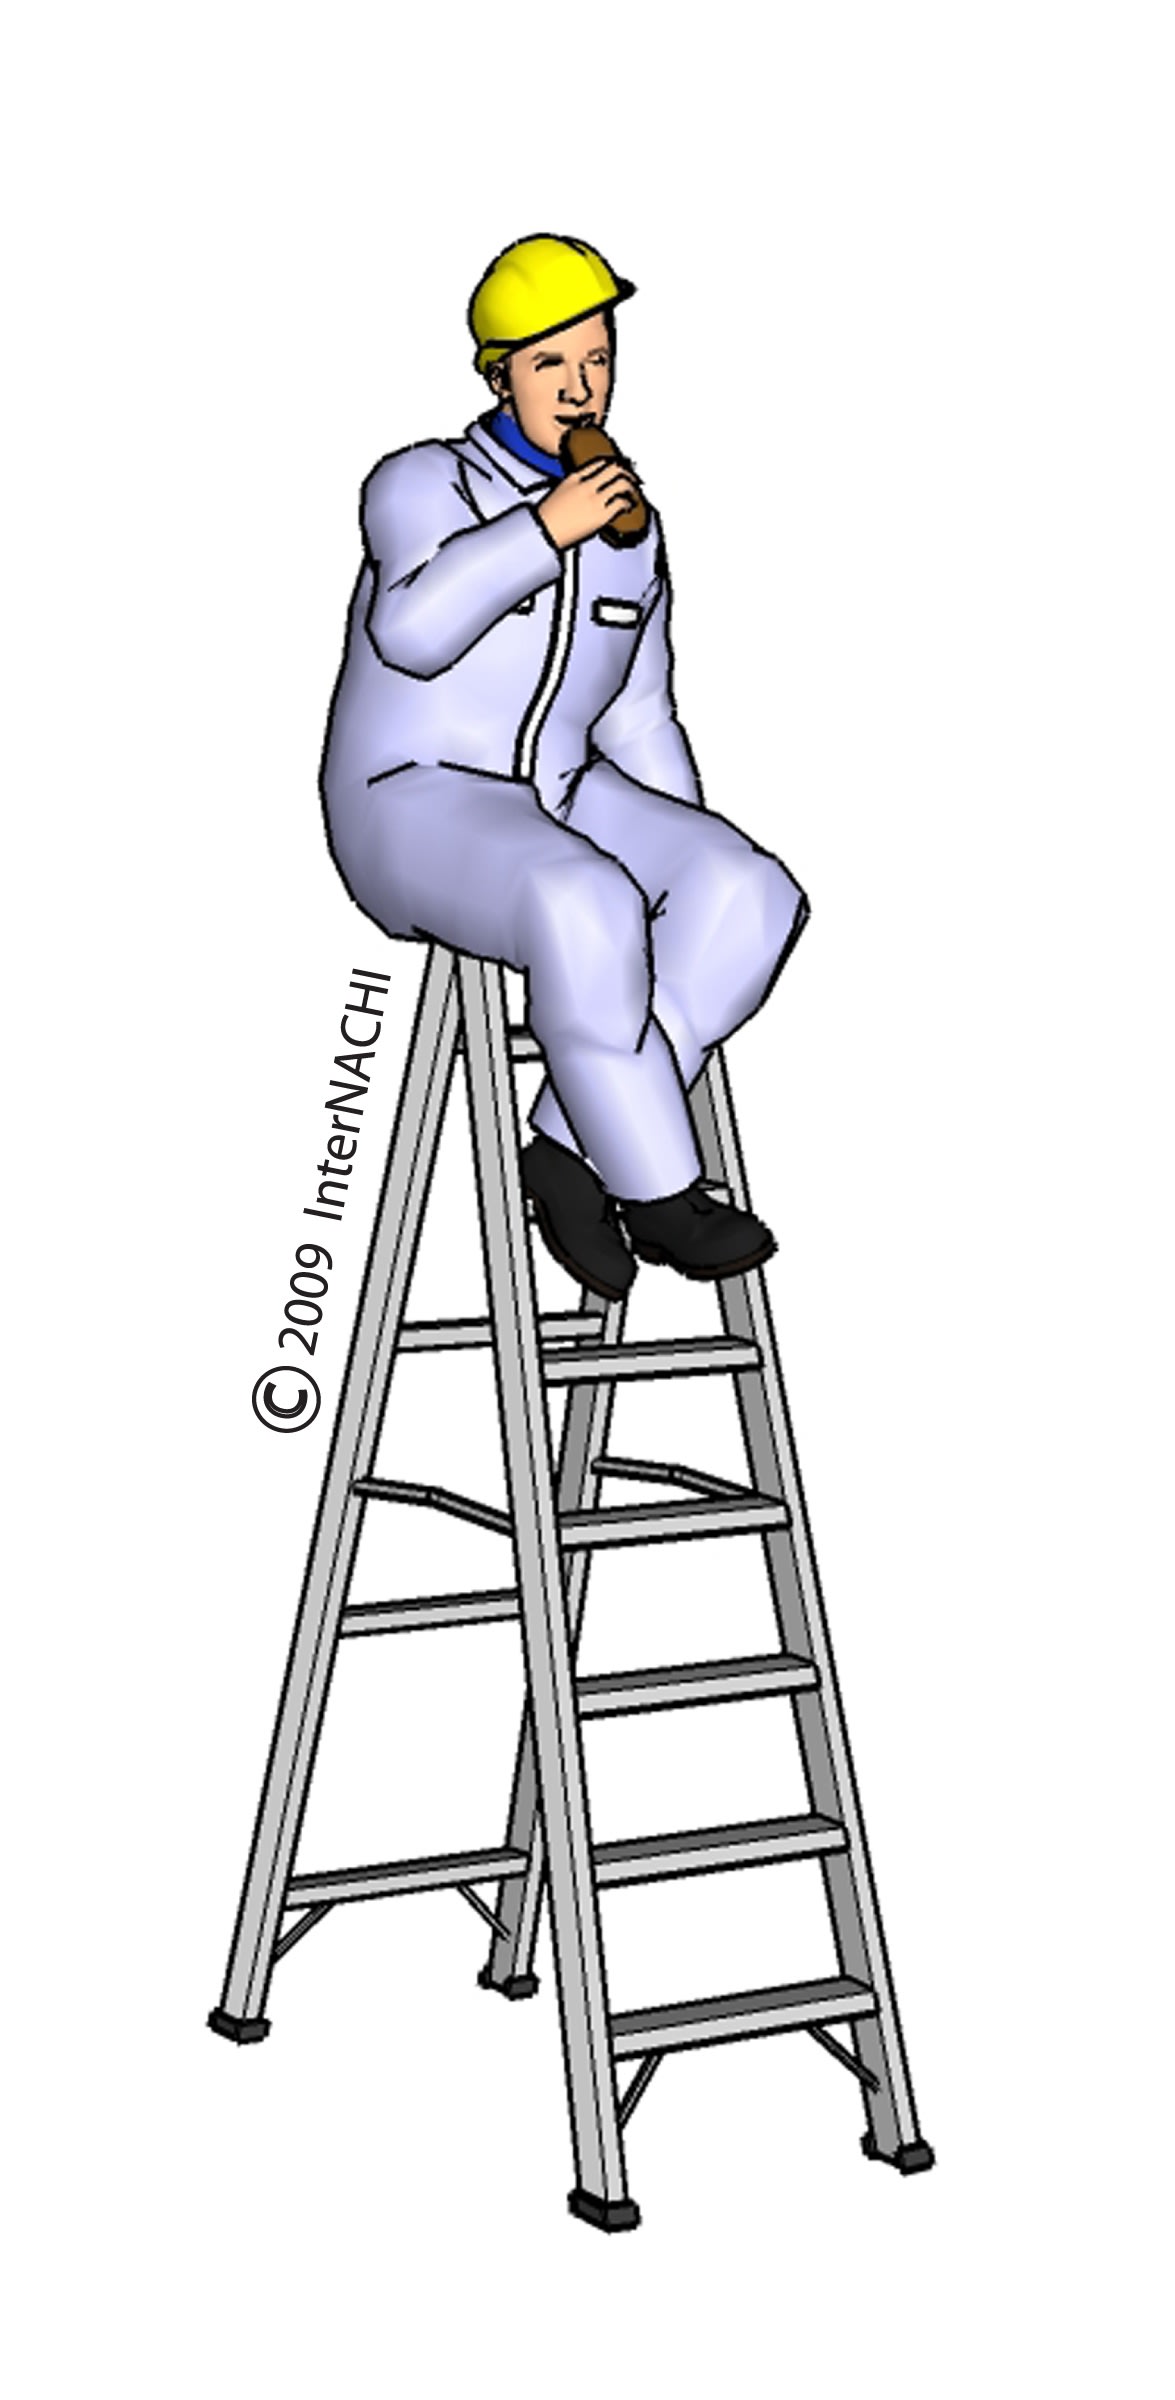 Inspector sitting on a ladder.